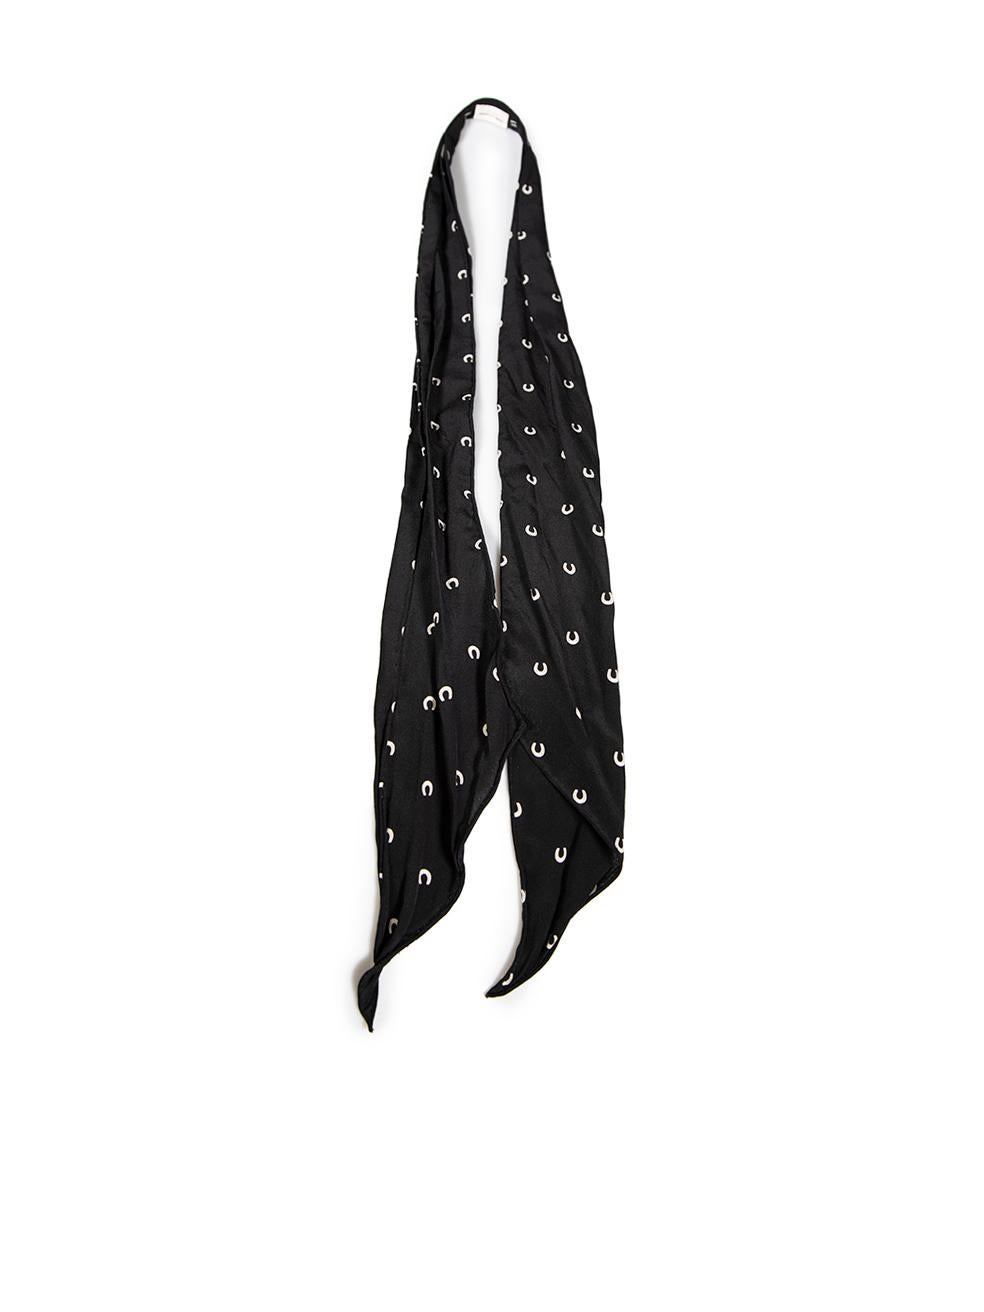 CONDITION is Very good. Minimal wear to scarf is evident. Minimal wear to the front and back with slight fading in areas on this used Saint Laurent designer resale item.
 
 
 
 Details
 
 
 Black
 
 Silk
 
 Scarf
 
 Horse shoe print pattern
 
 
 
 
